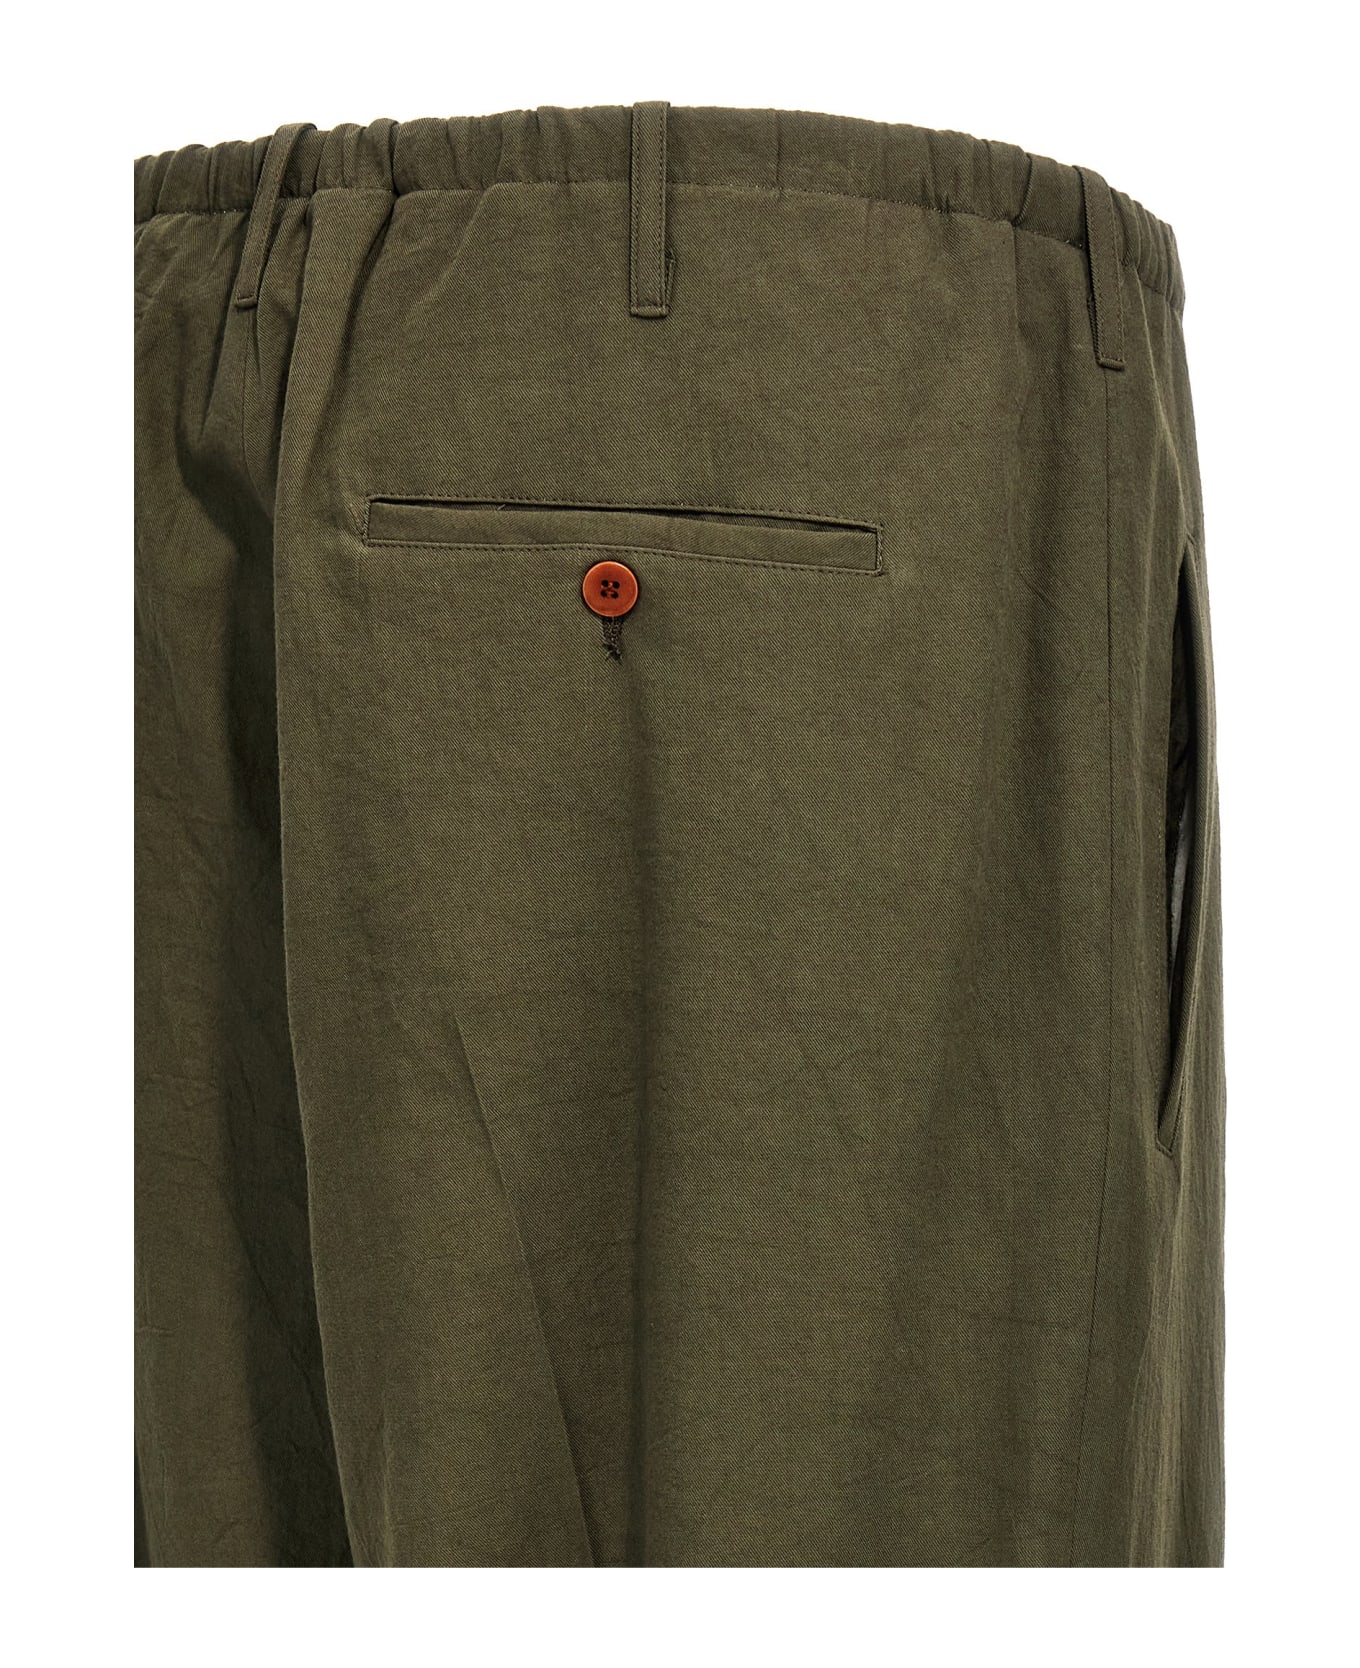 Magliano 'new People's' Pants - Green